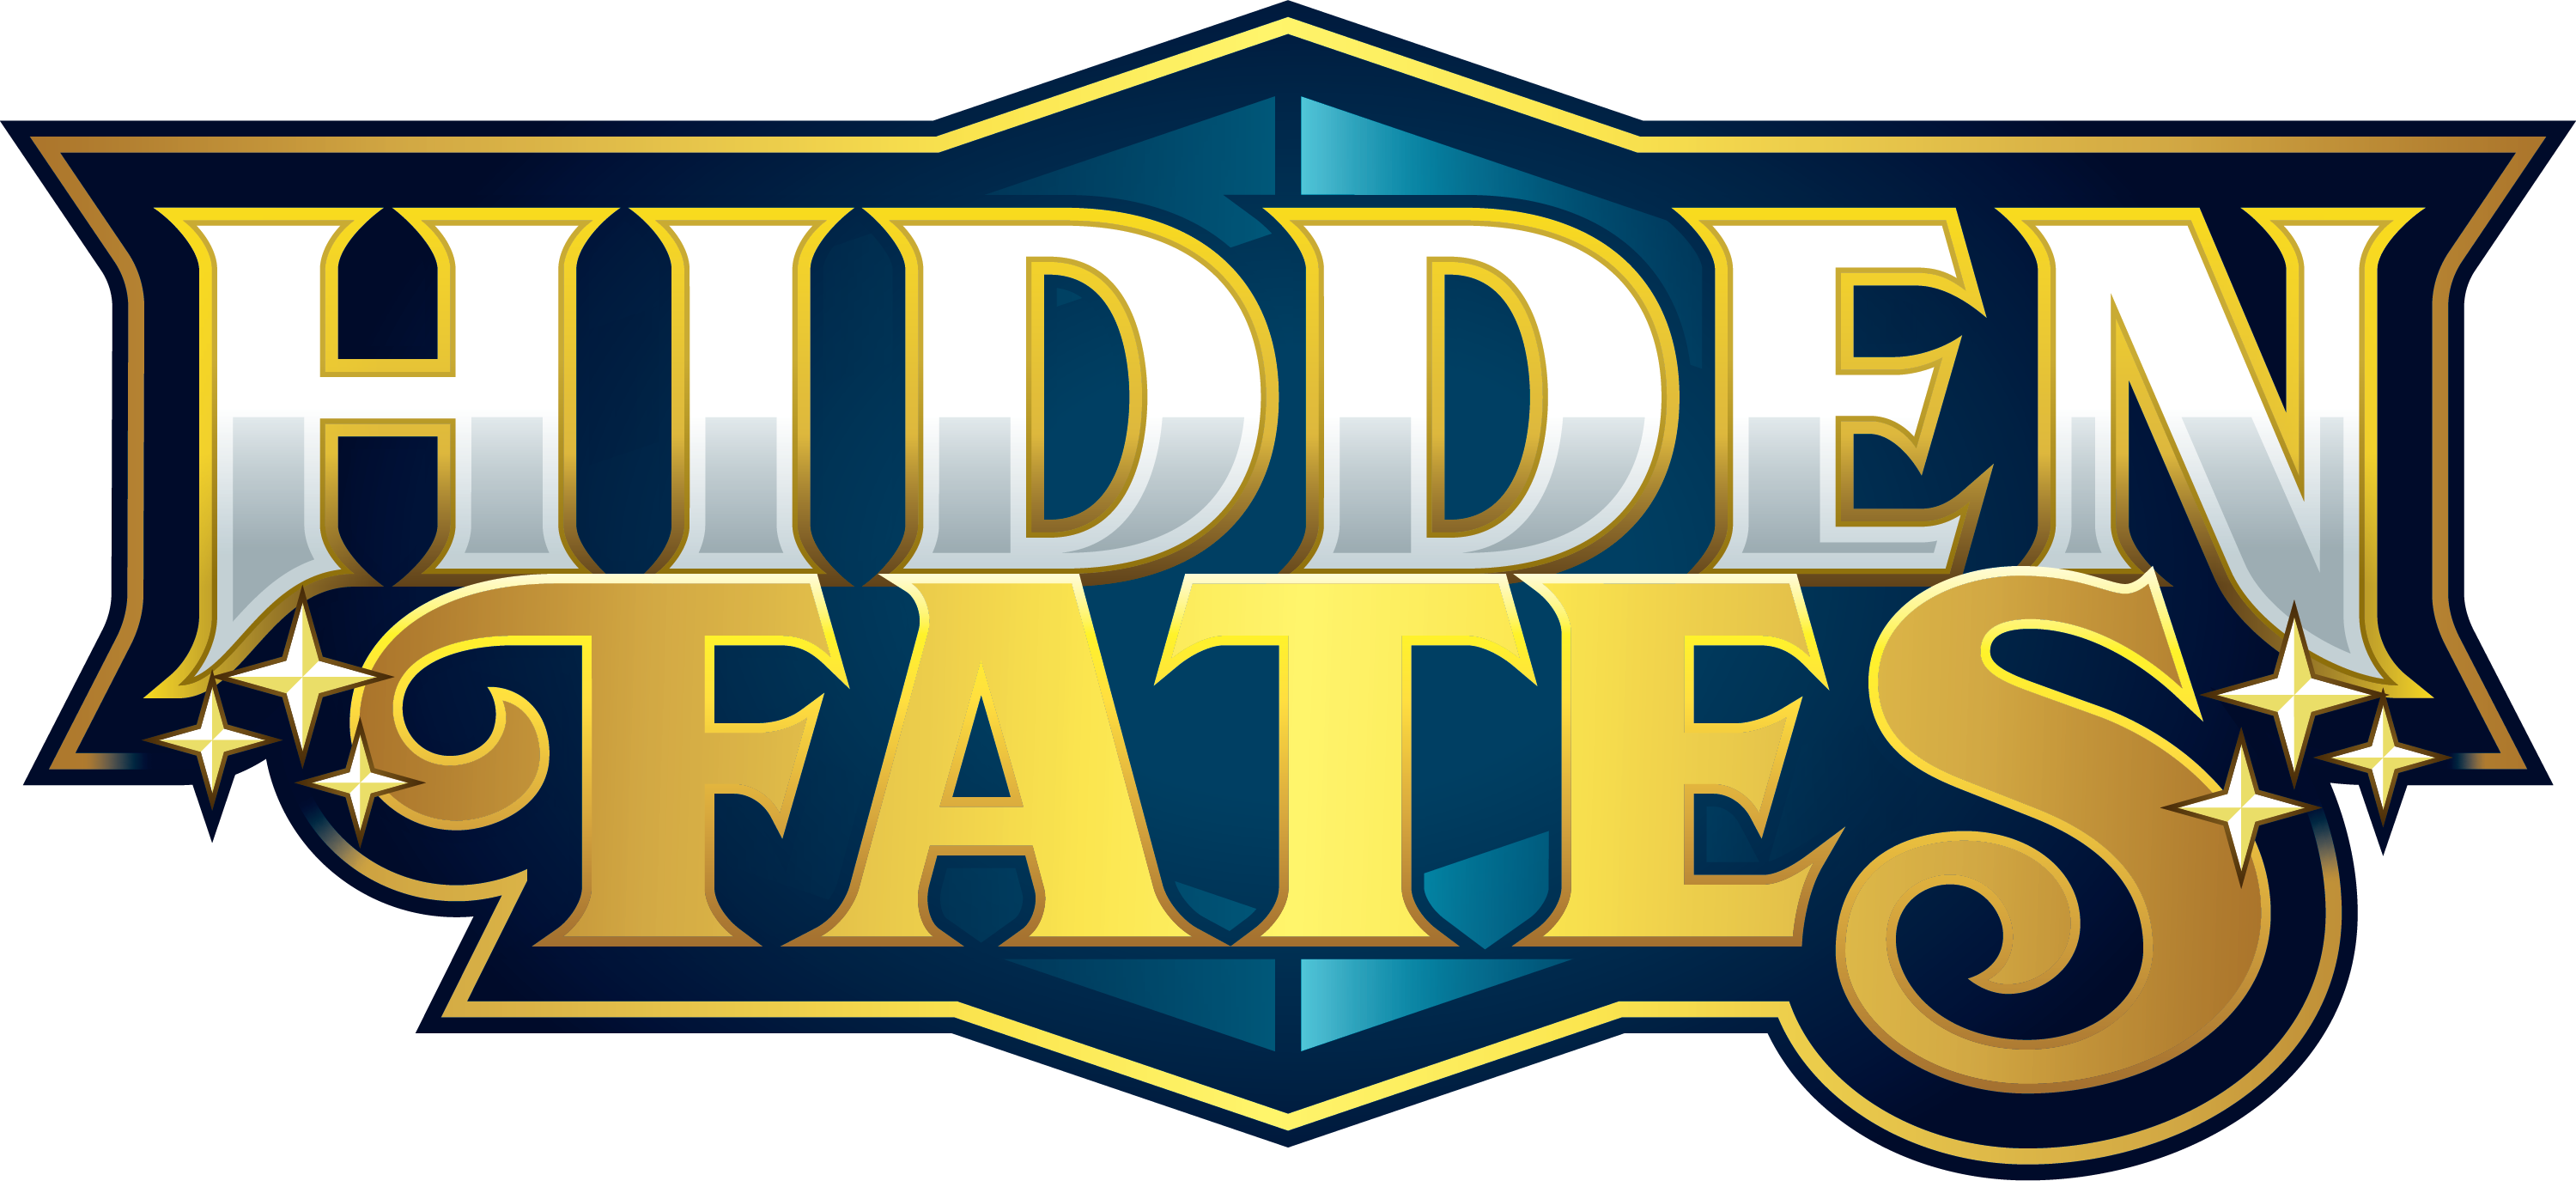 Pokemon Tcg Hidden Fates Expansion Is Coming On Aug 23 Will